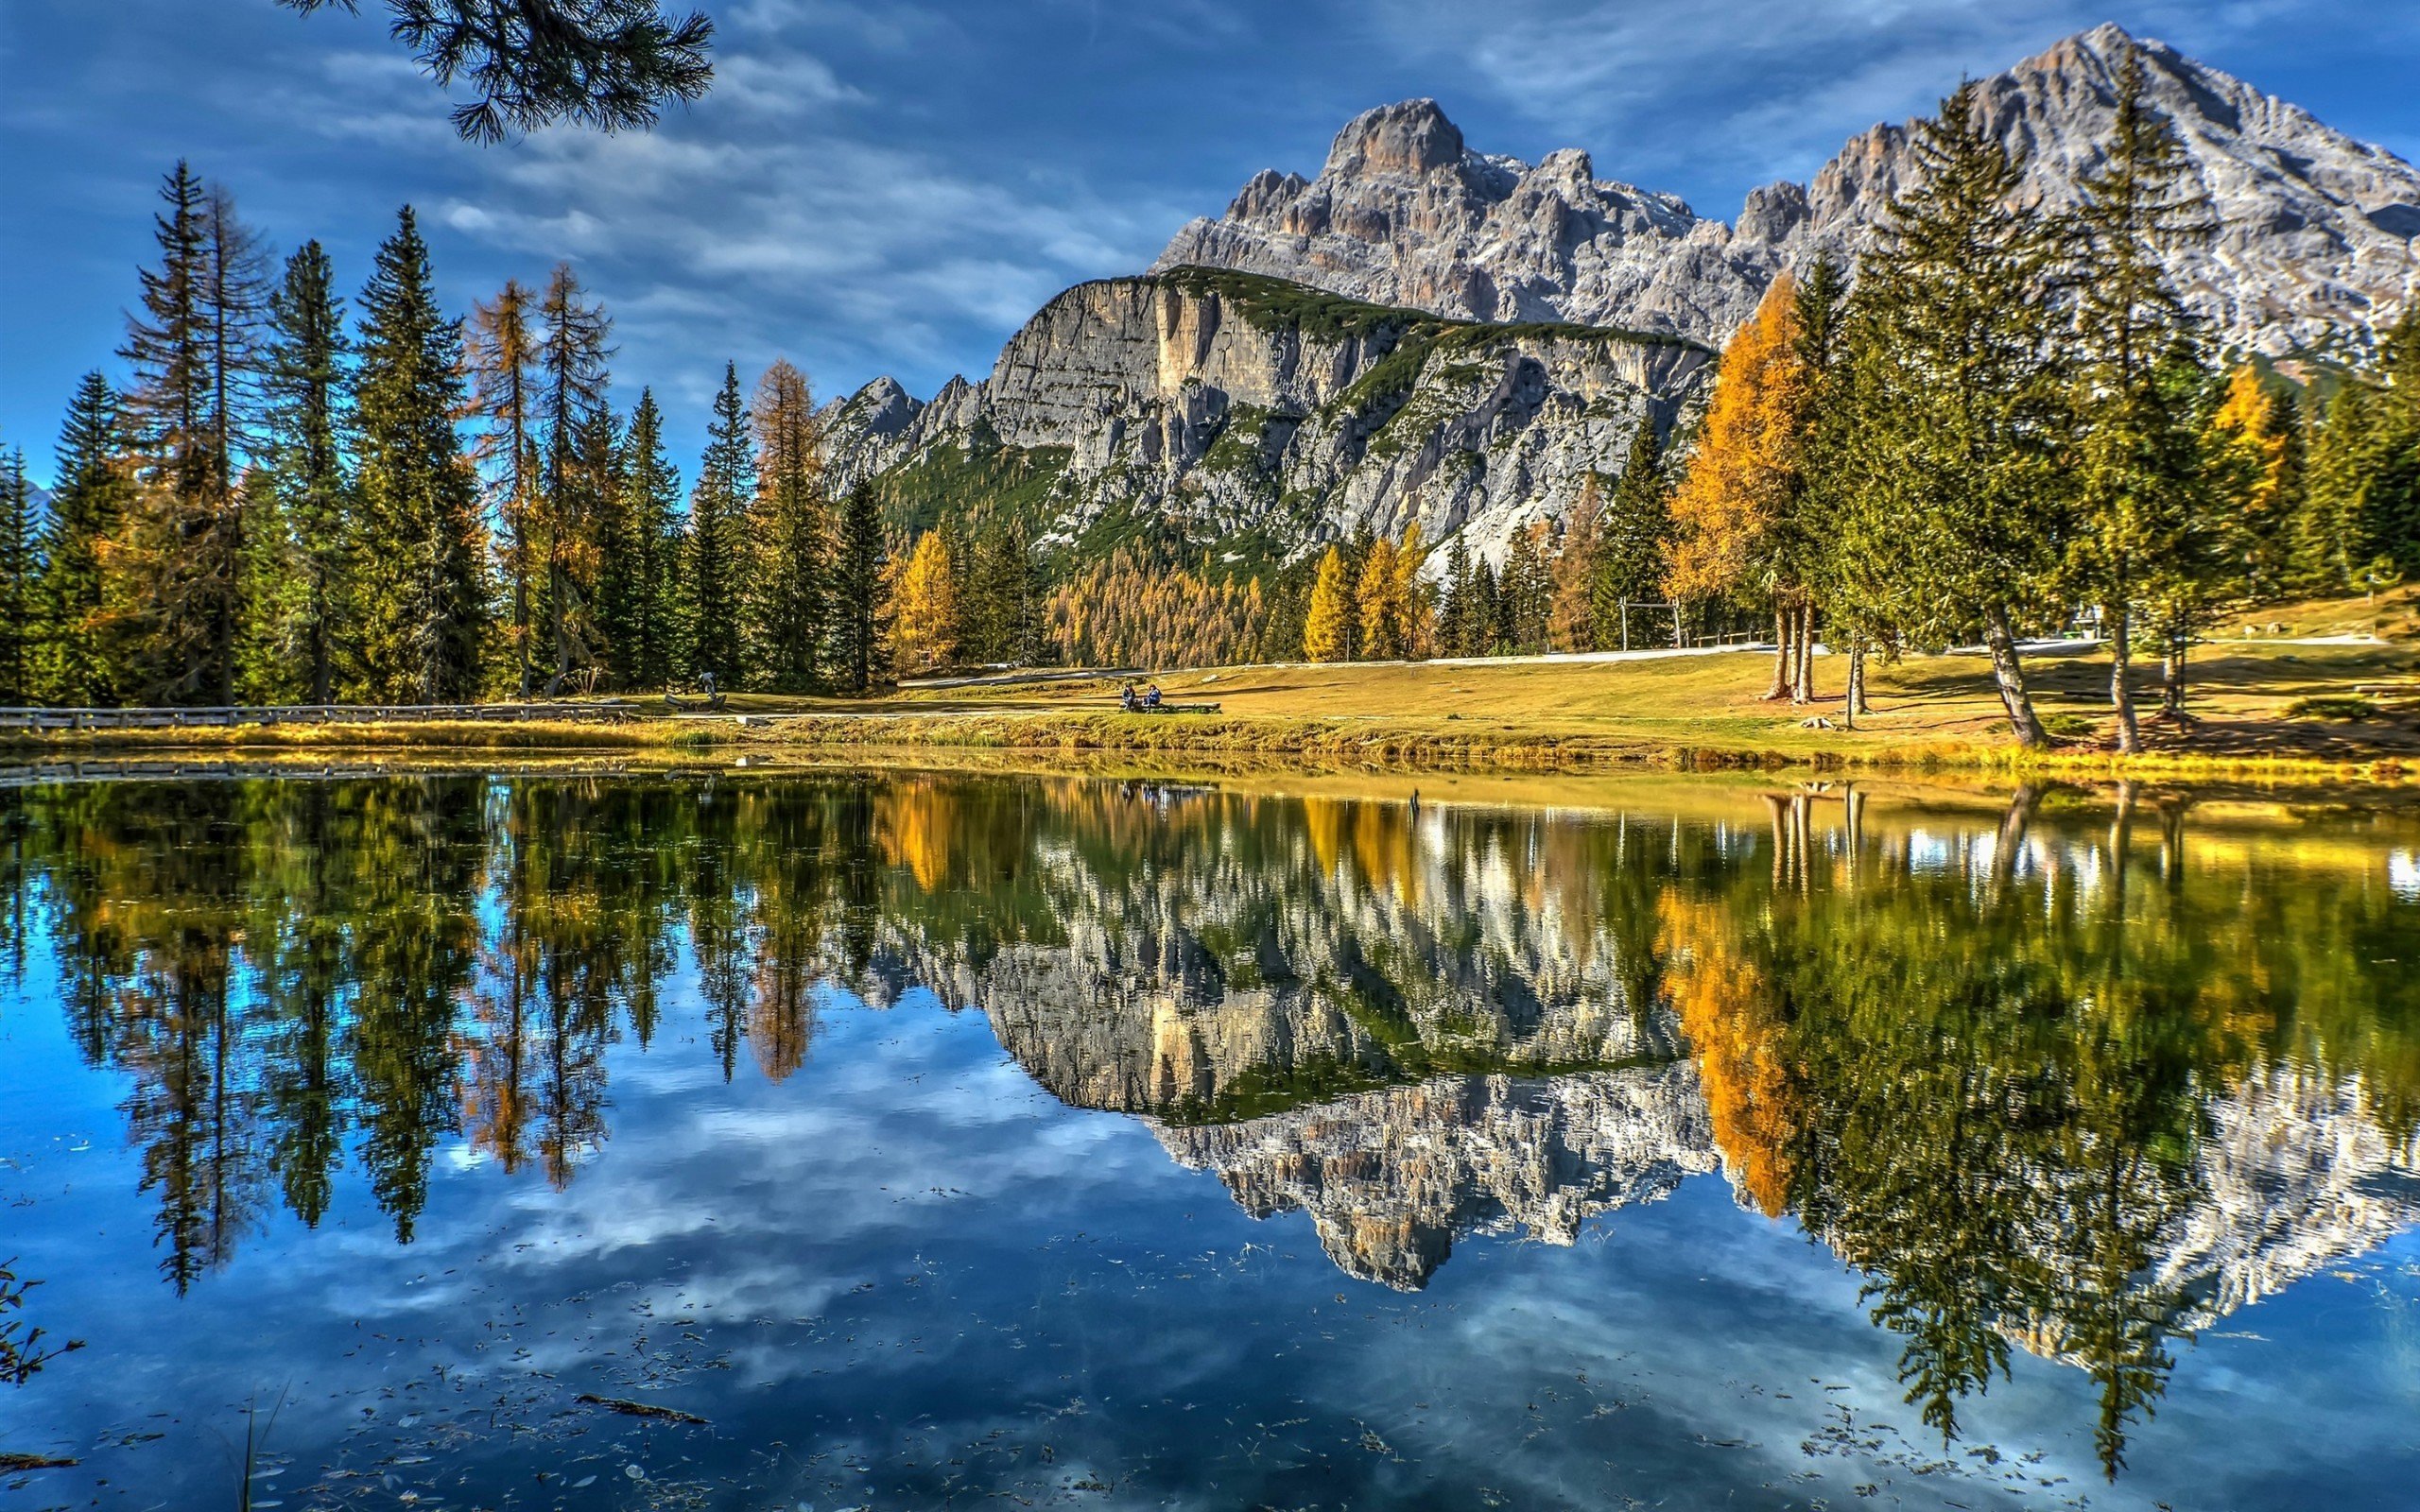 Download 2560x1600 Lake, Trees, Reflection, Italy, Dolomites, Mountains, Sky, Autumn Wallpaper for MacBook Pro 13 inch